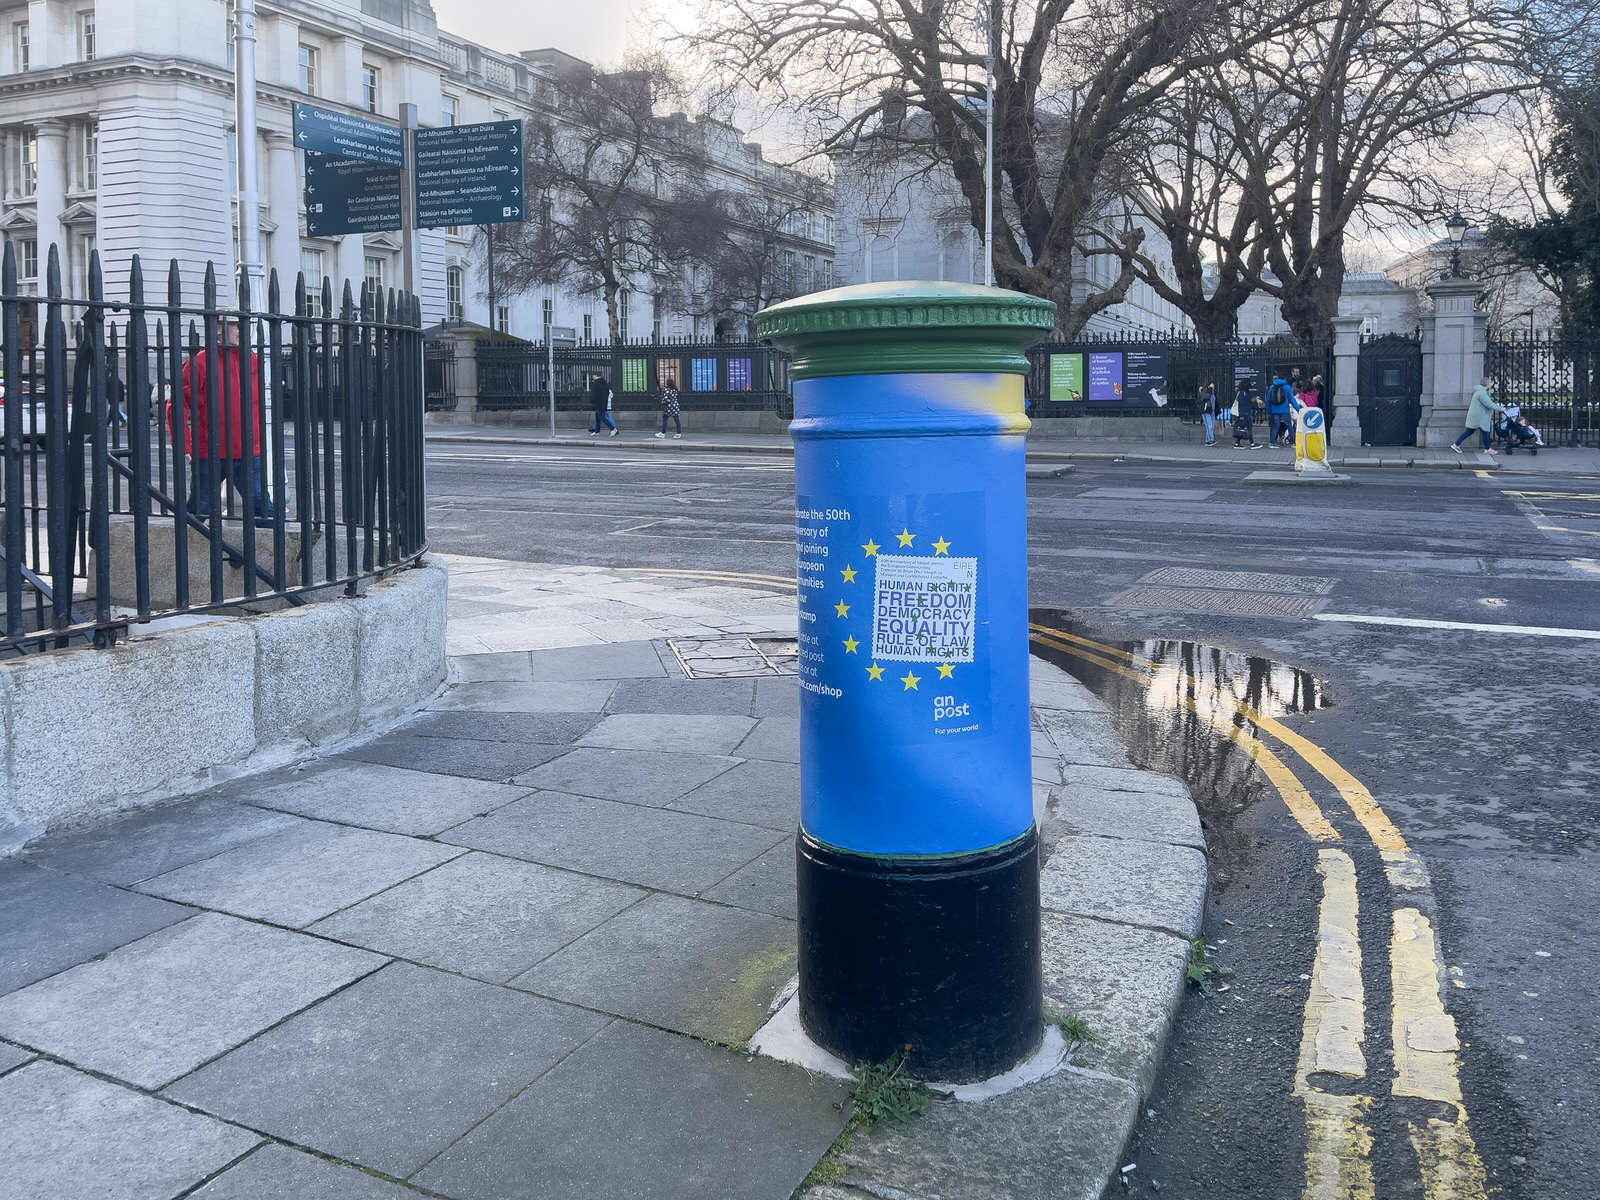 MY FIRST TIME TO SEE A BLUE POST BOX IN DUBLIN